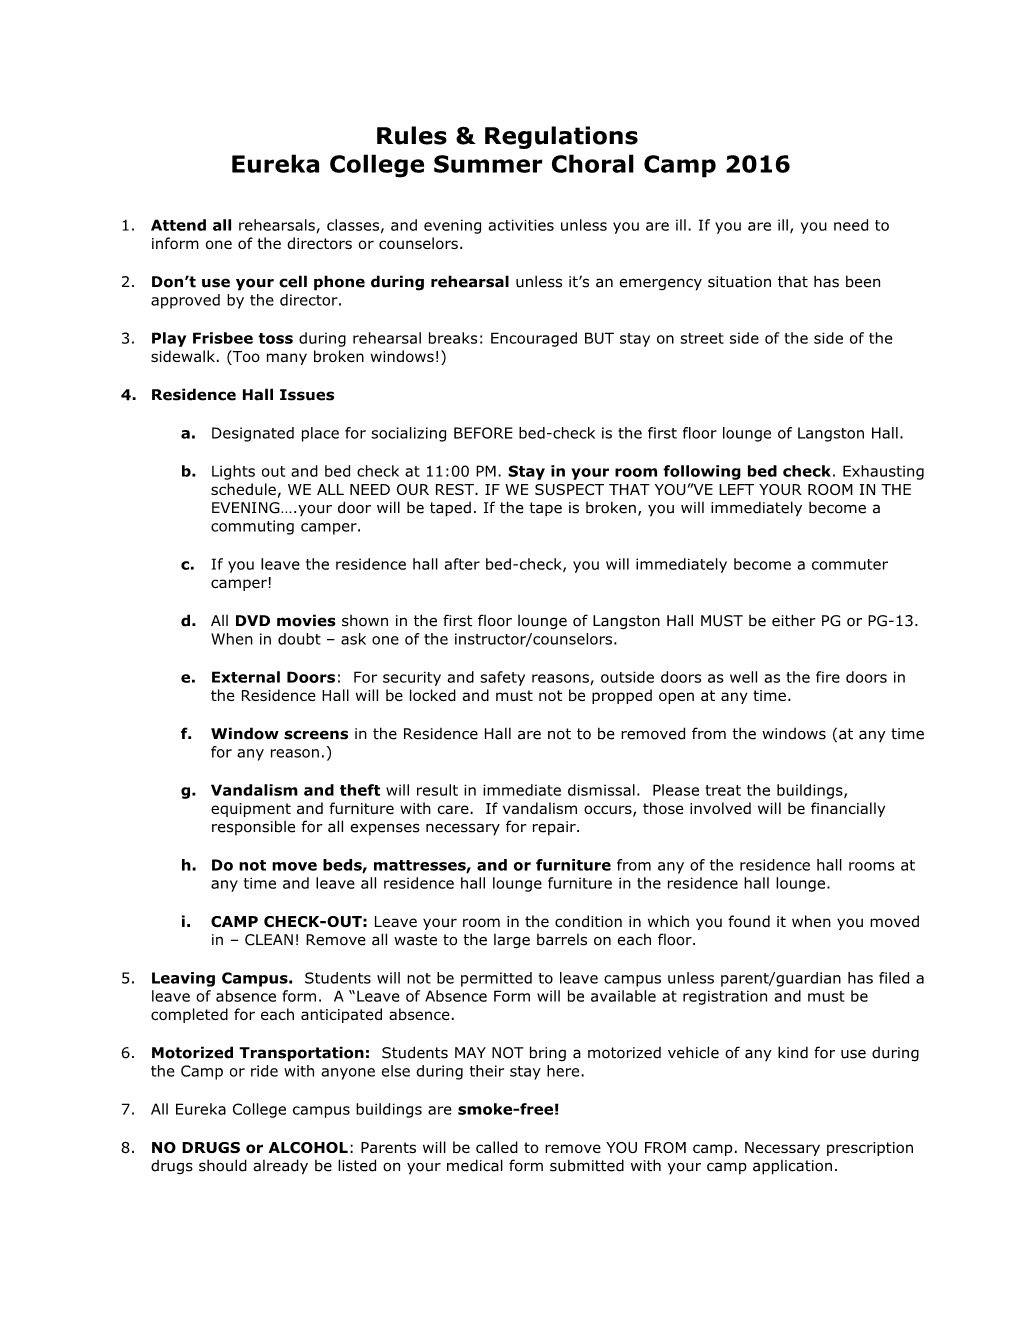 Peoria Area Civic Chorale Summer Choral Camp Rules & Regulations / Summer 2006